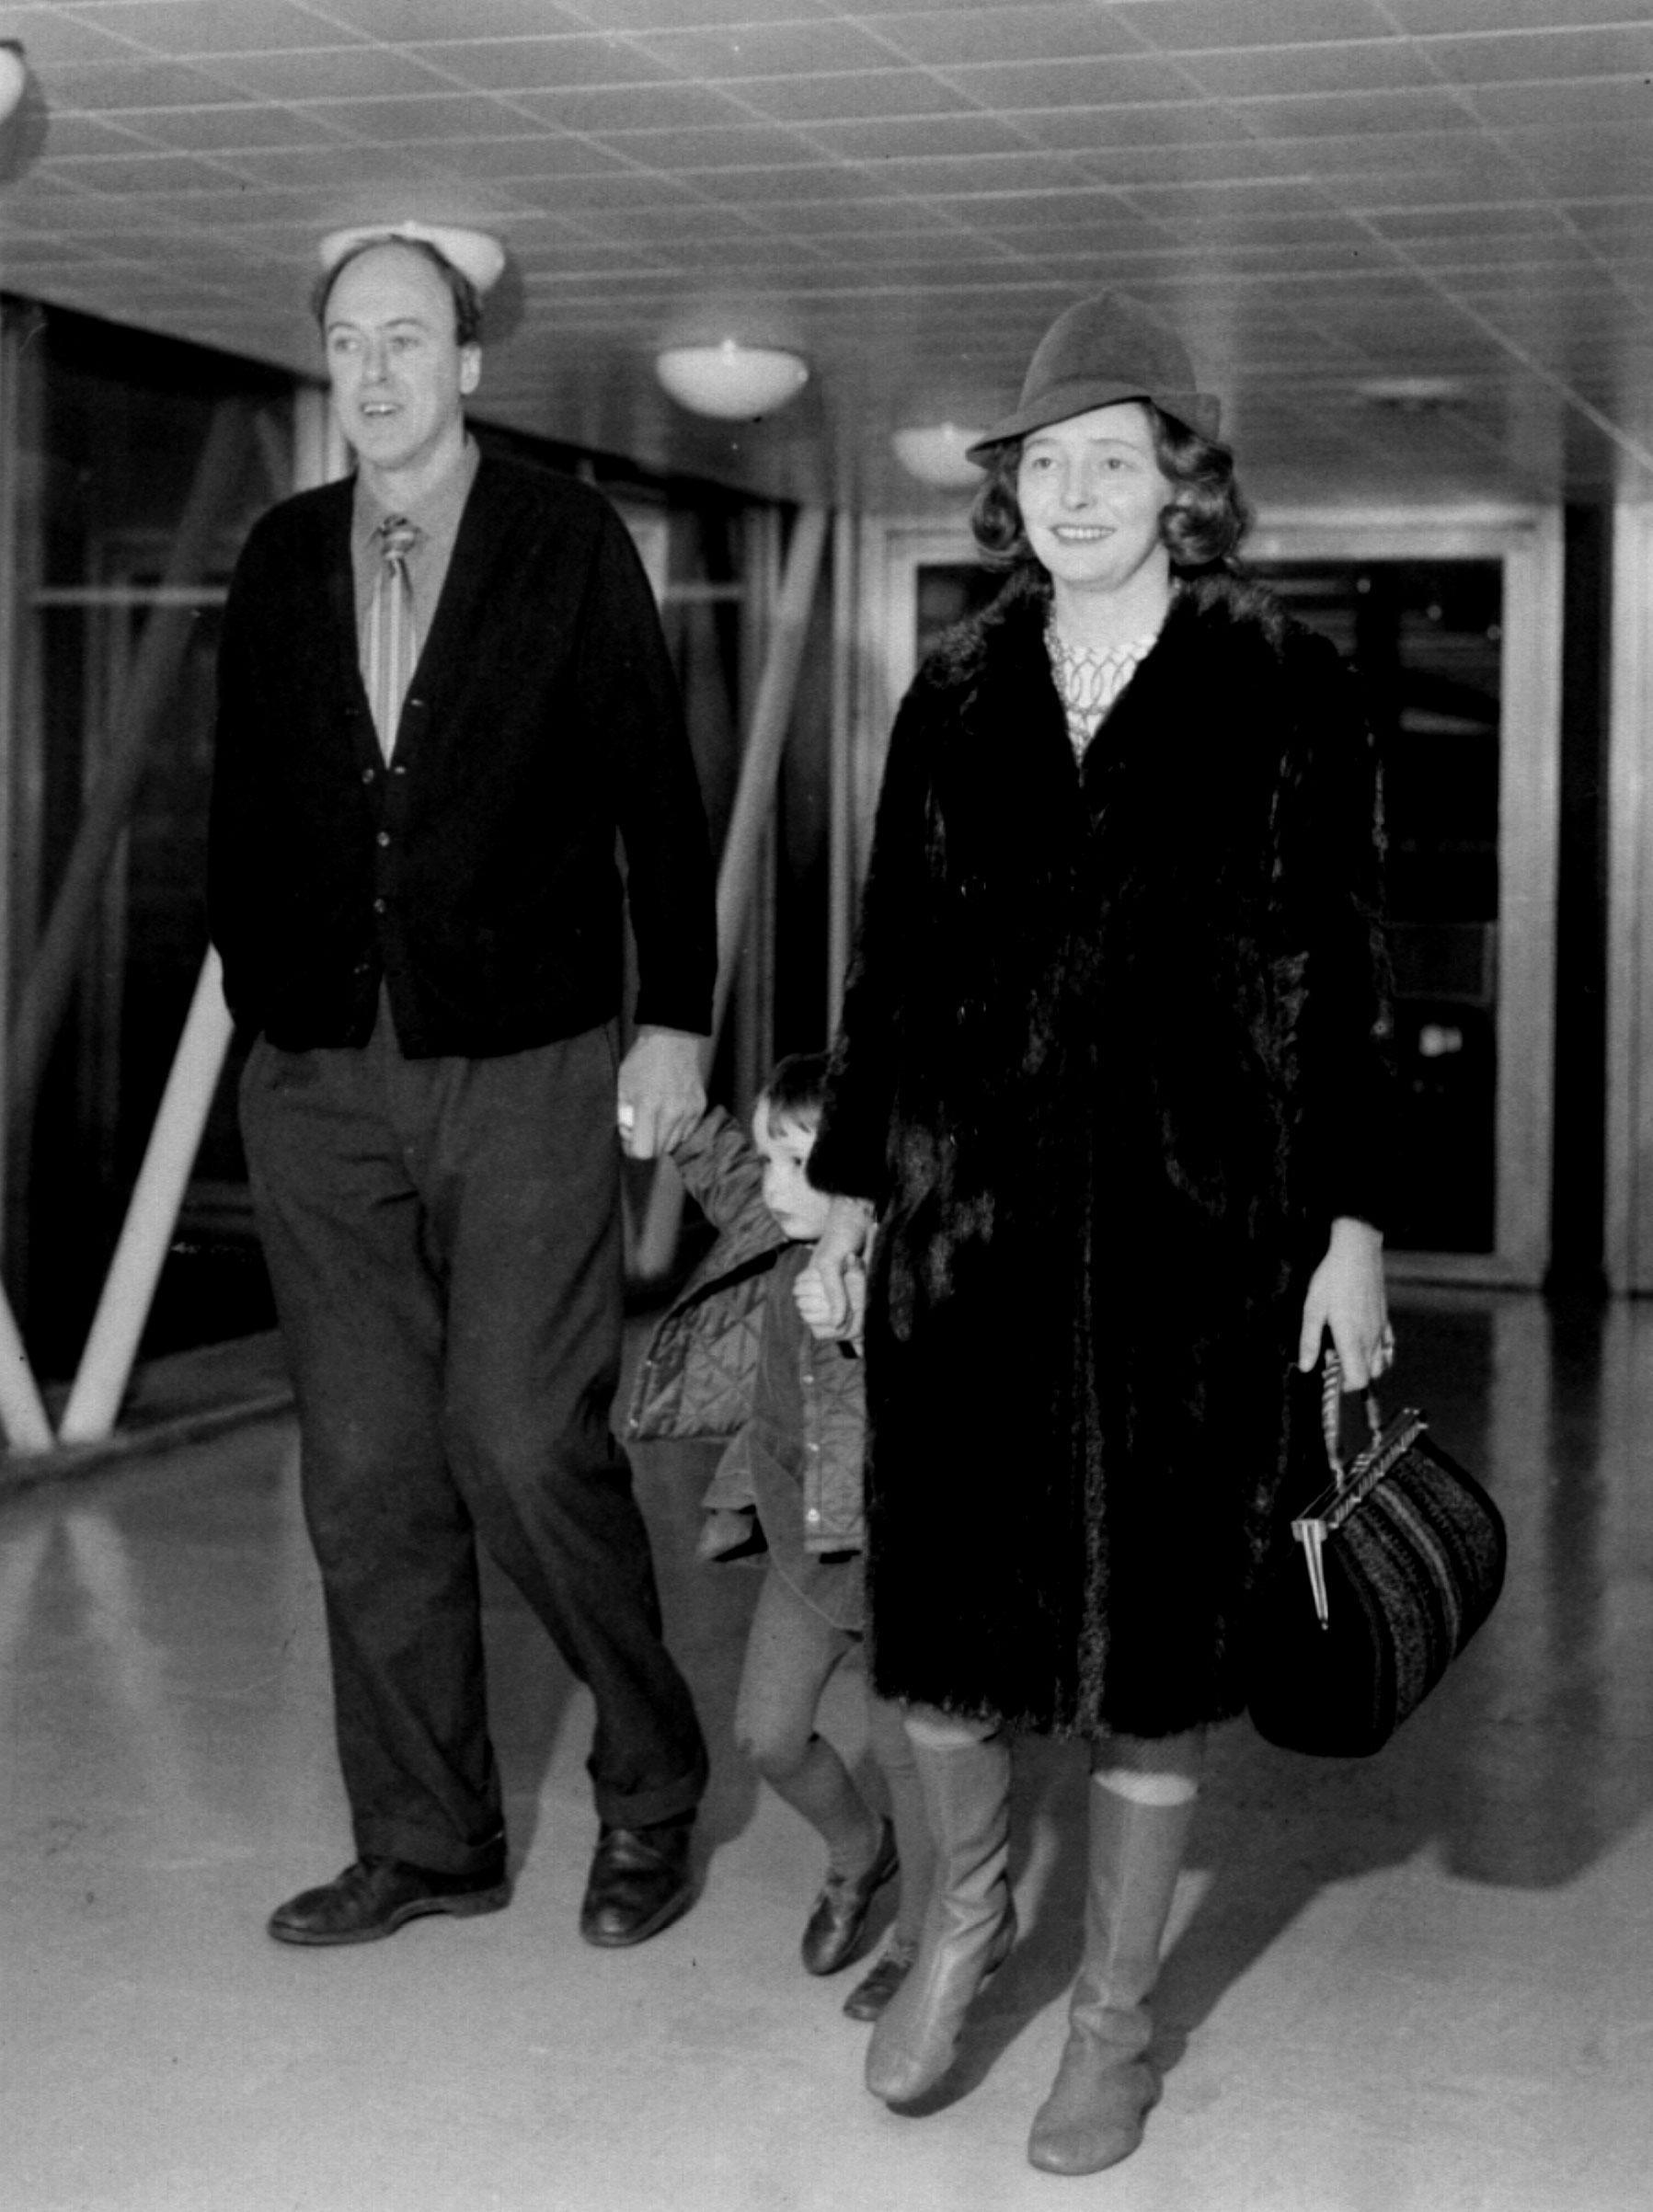 PA NEWS PHOTO 30/1/68 PATRICIA NEAL WITH HUSBAND WRITER ROALD DAHL AND HER THREE YEAR OLD DAUGHTER OPHELLA AT HEATHROW AIRPORT IN LONDON. Ref #: PA.1072577 Date: 30/01/1968